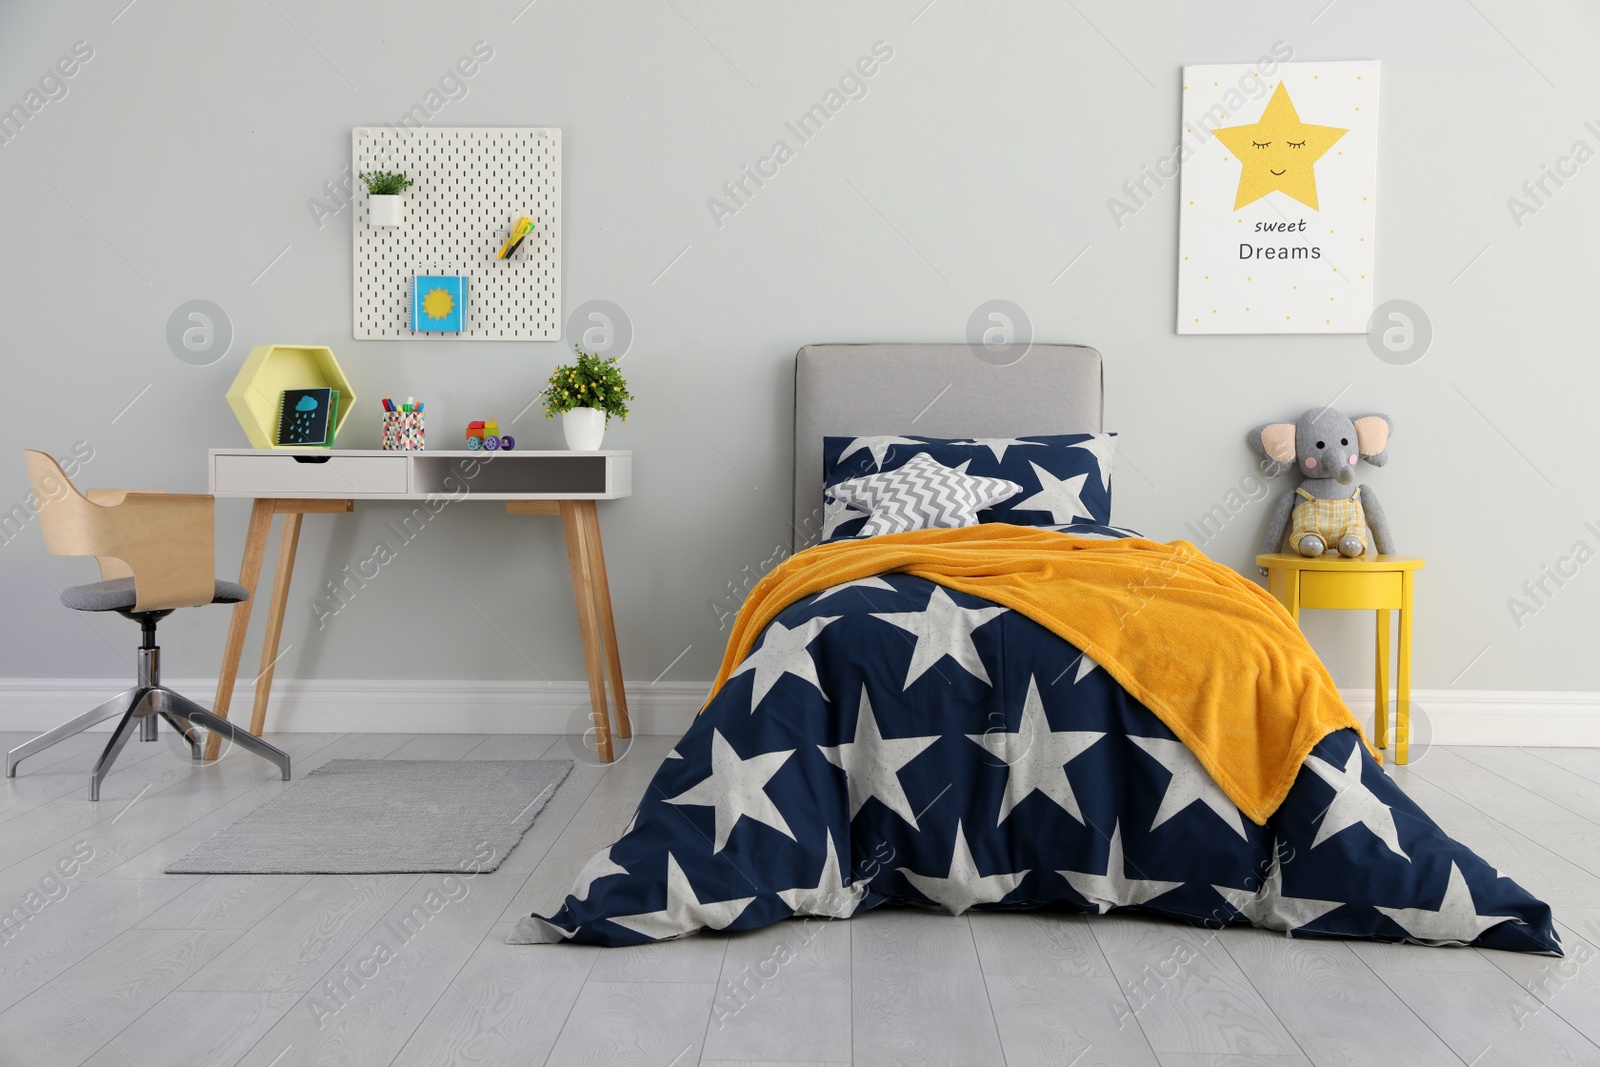 Photo of Bed with star patterned linens in child's bedroom. Interior design